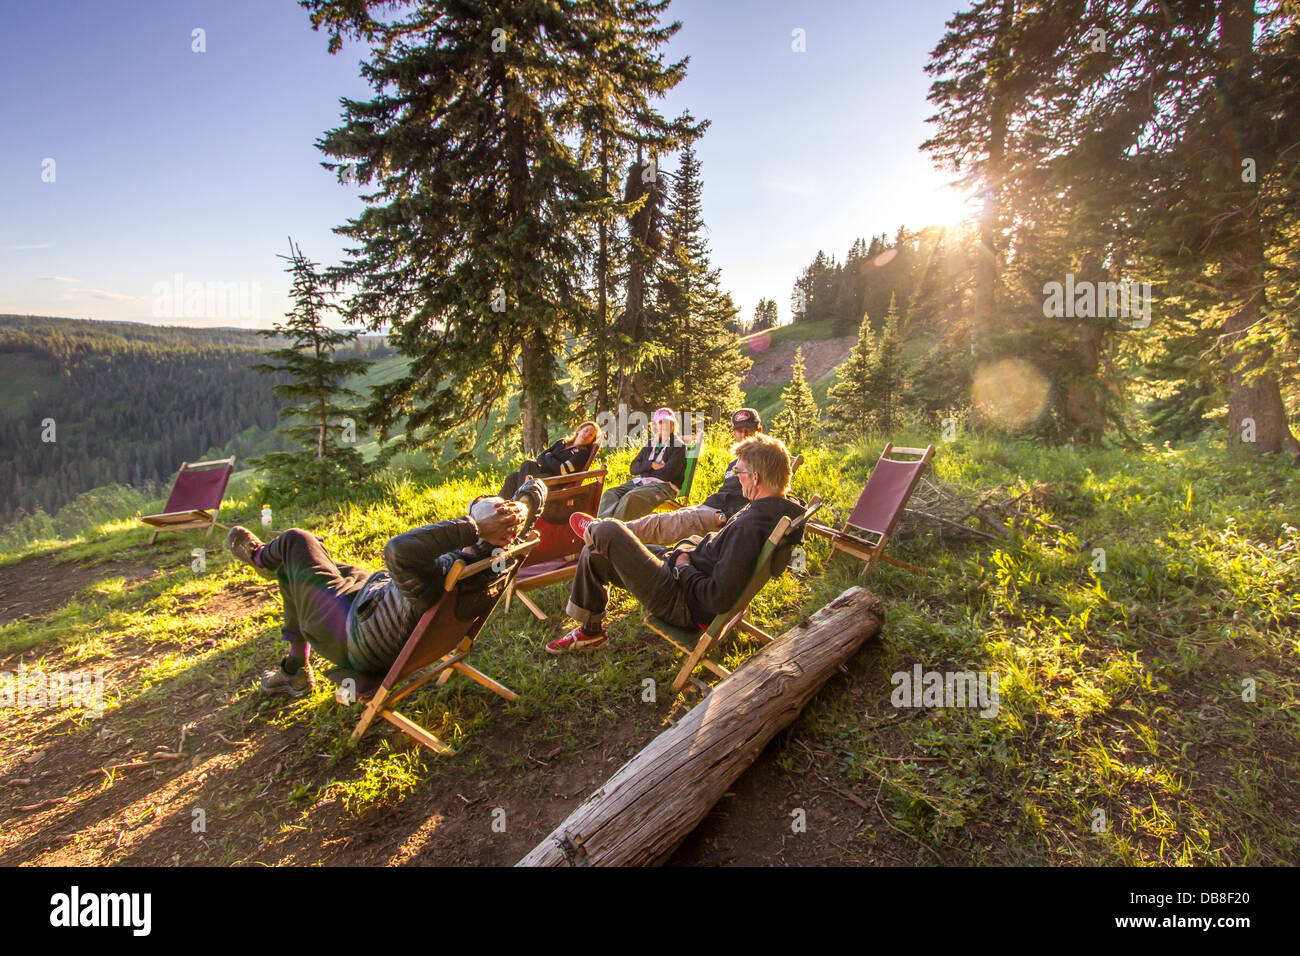 Group of people relaxing in chairs outdoors on vehicle supported mountain bike trip in South Western Colorado. Stock Photo